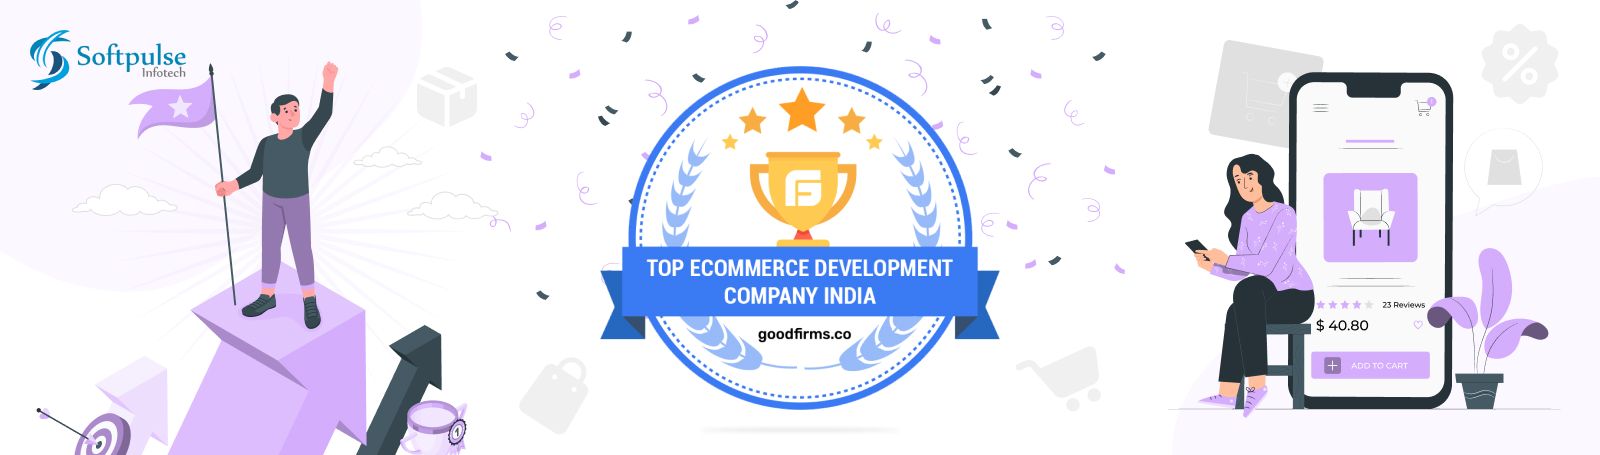 Softpulse Infotech Premium eCommerce Services Catches GoodFirms Attention